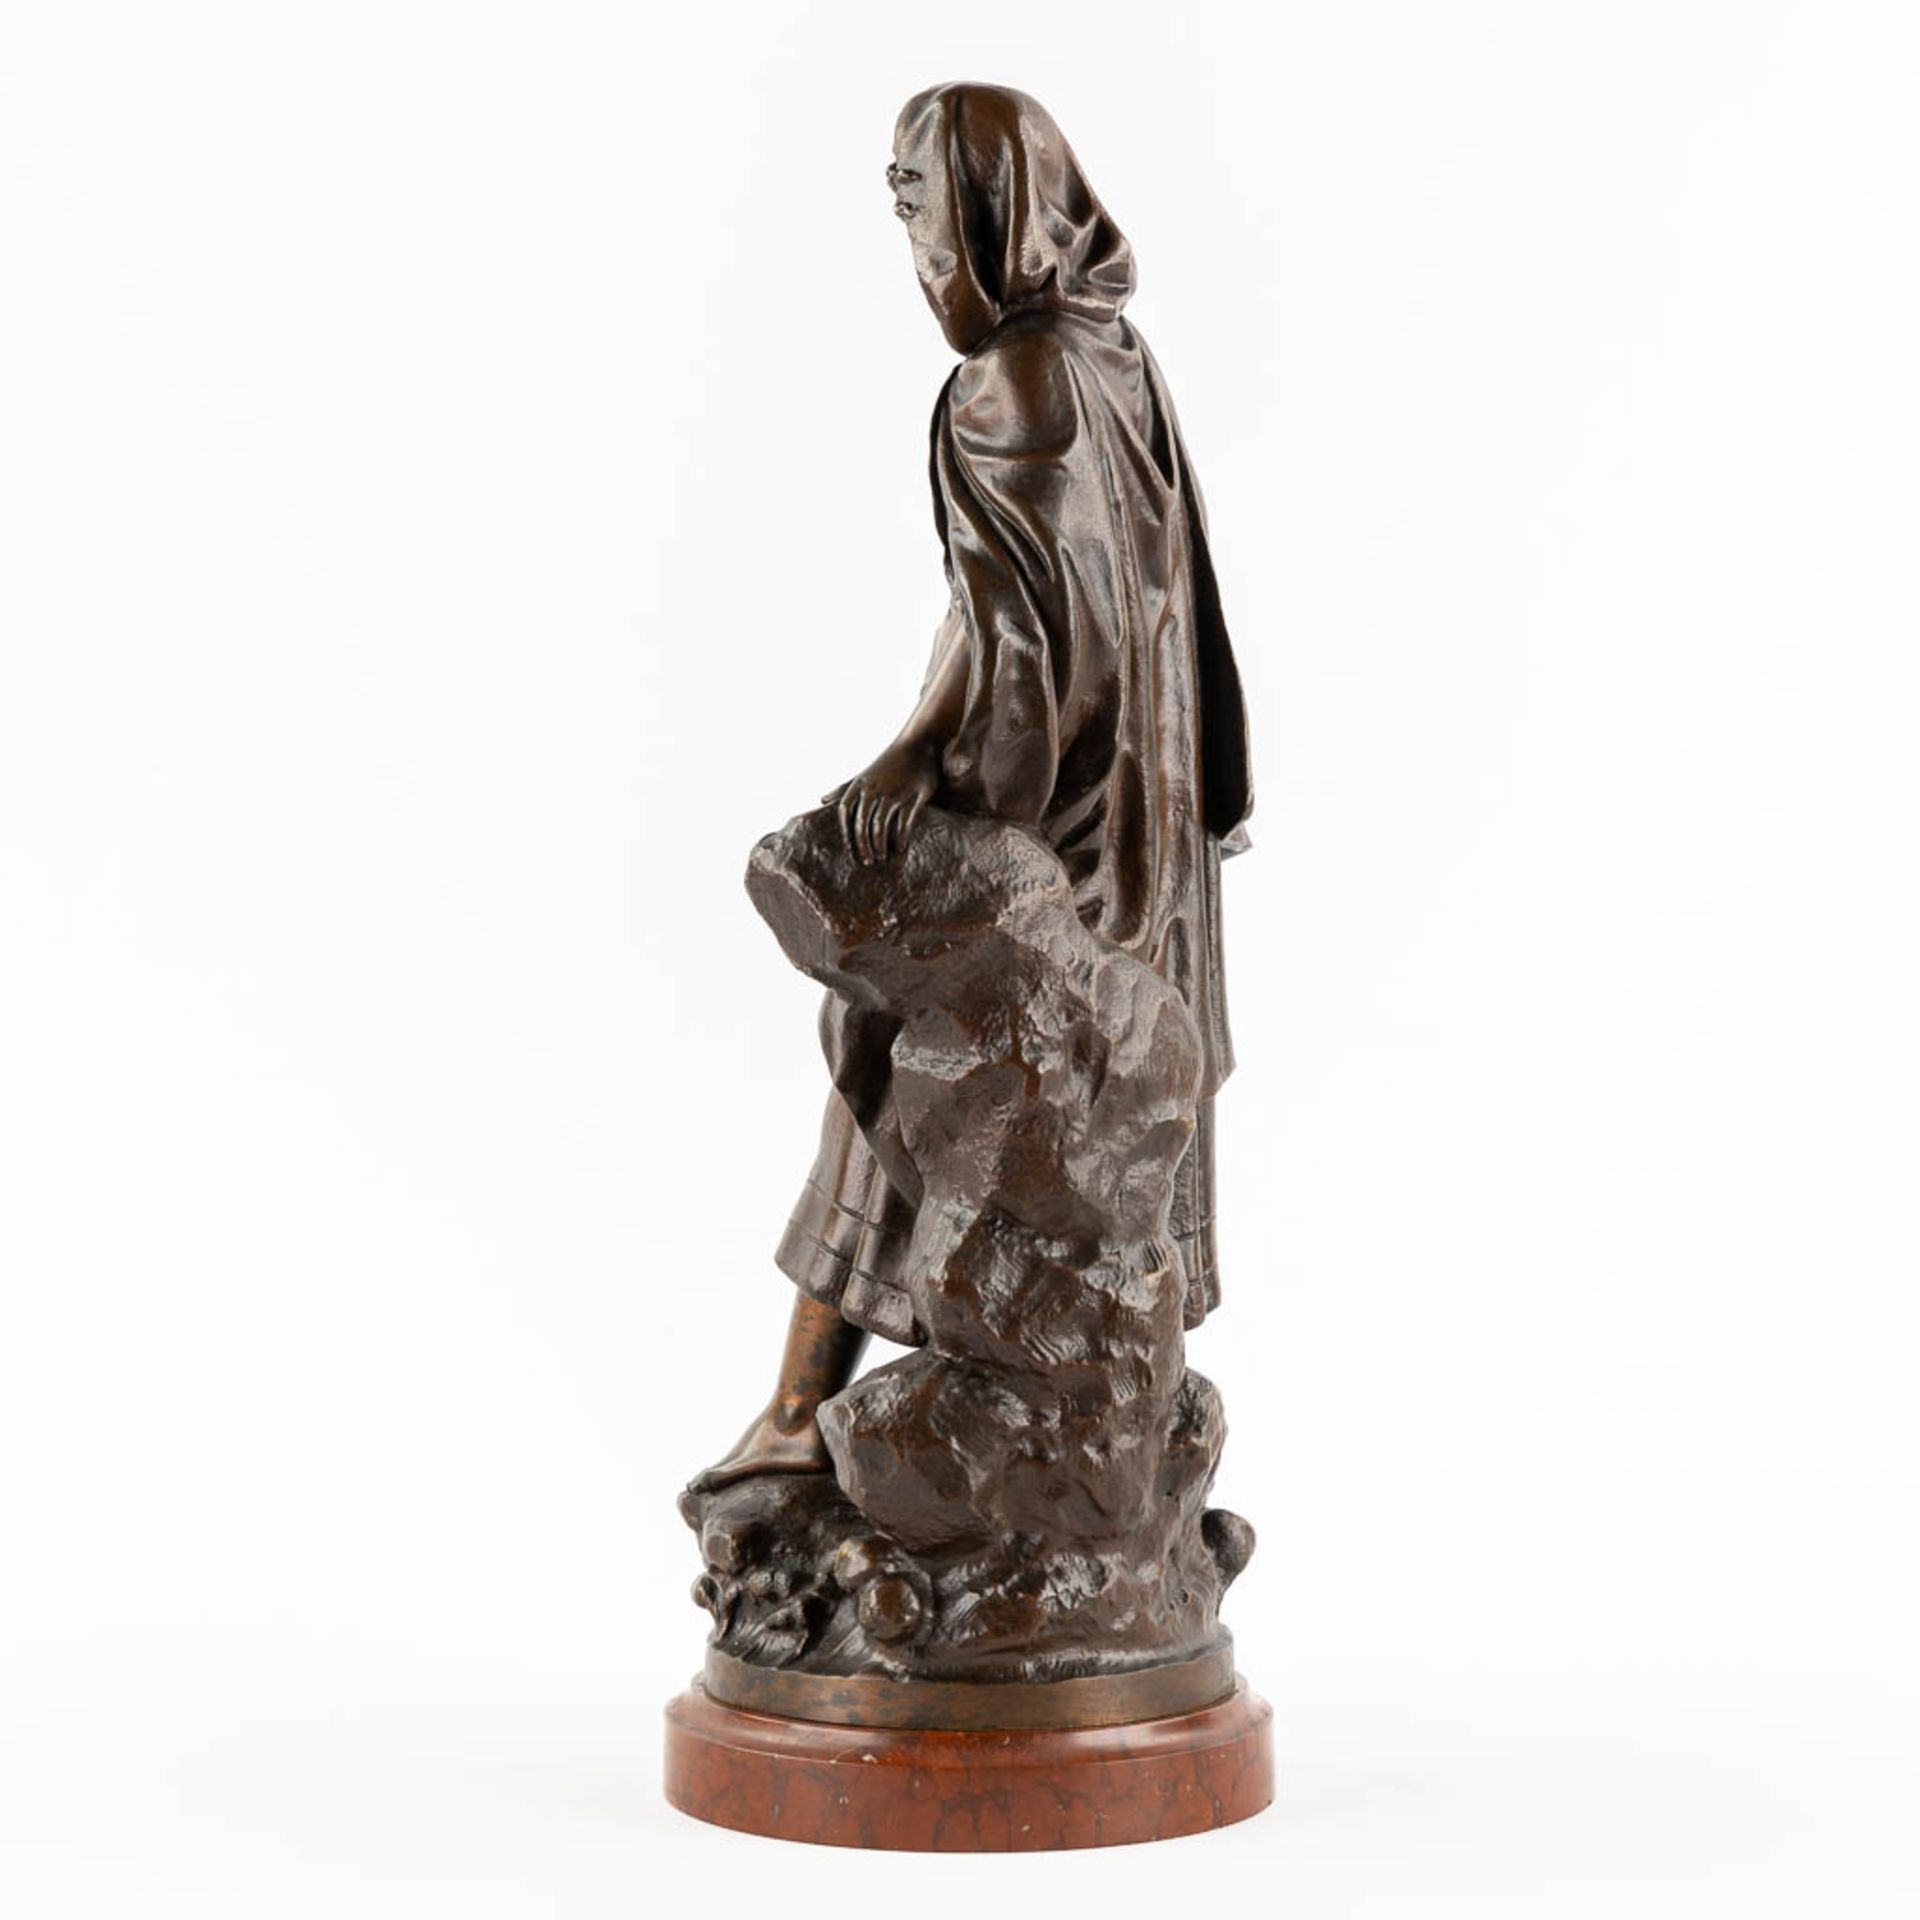 Eutrope BOURET (1833-1906) 'Lady with flowers' patinated bronze on a marble base. (L:19 x W:17 x H:4 - Image 6 of 11